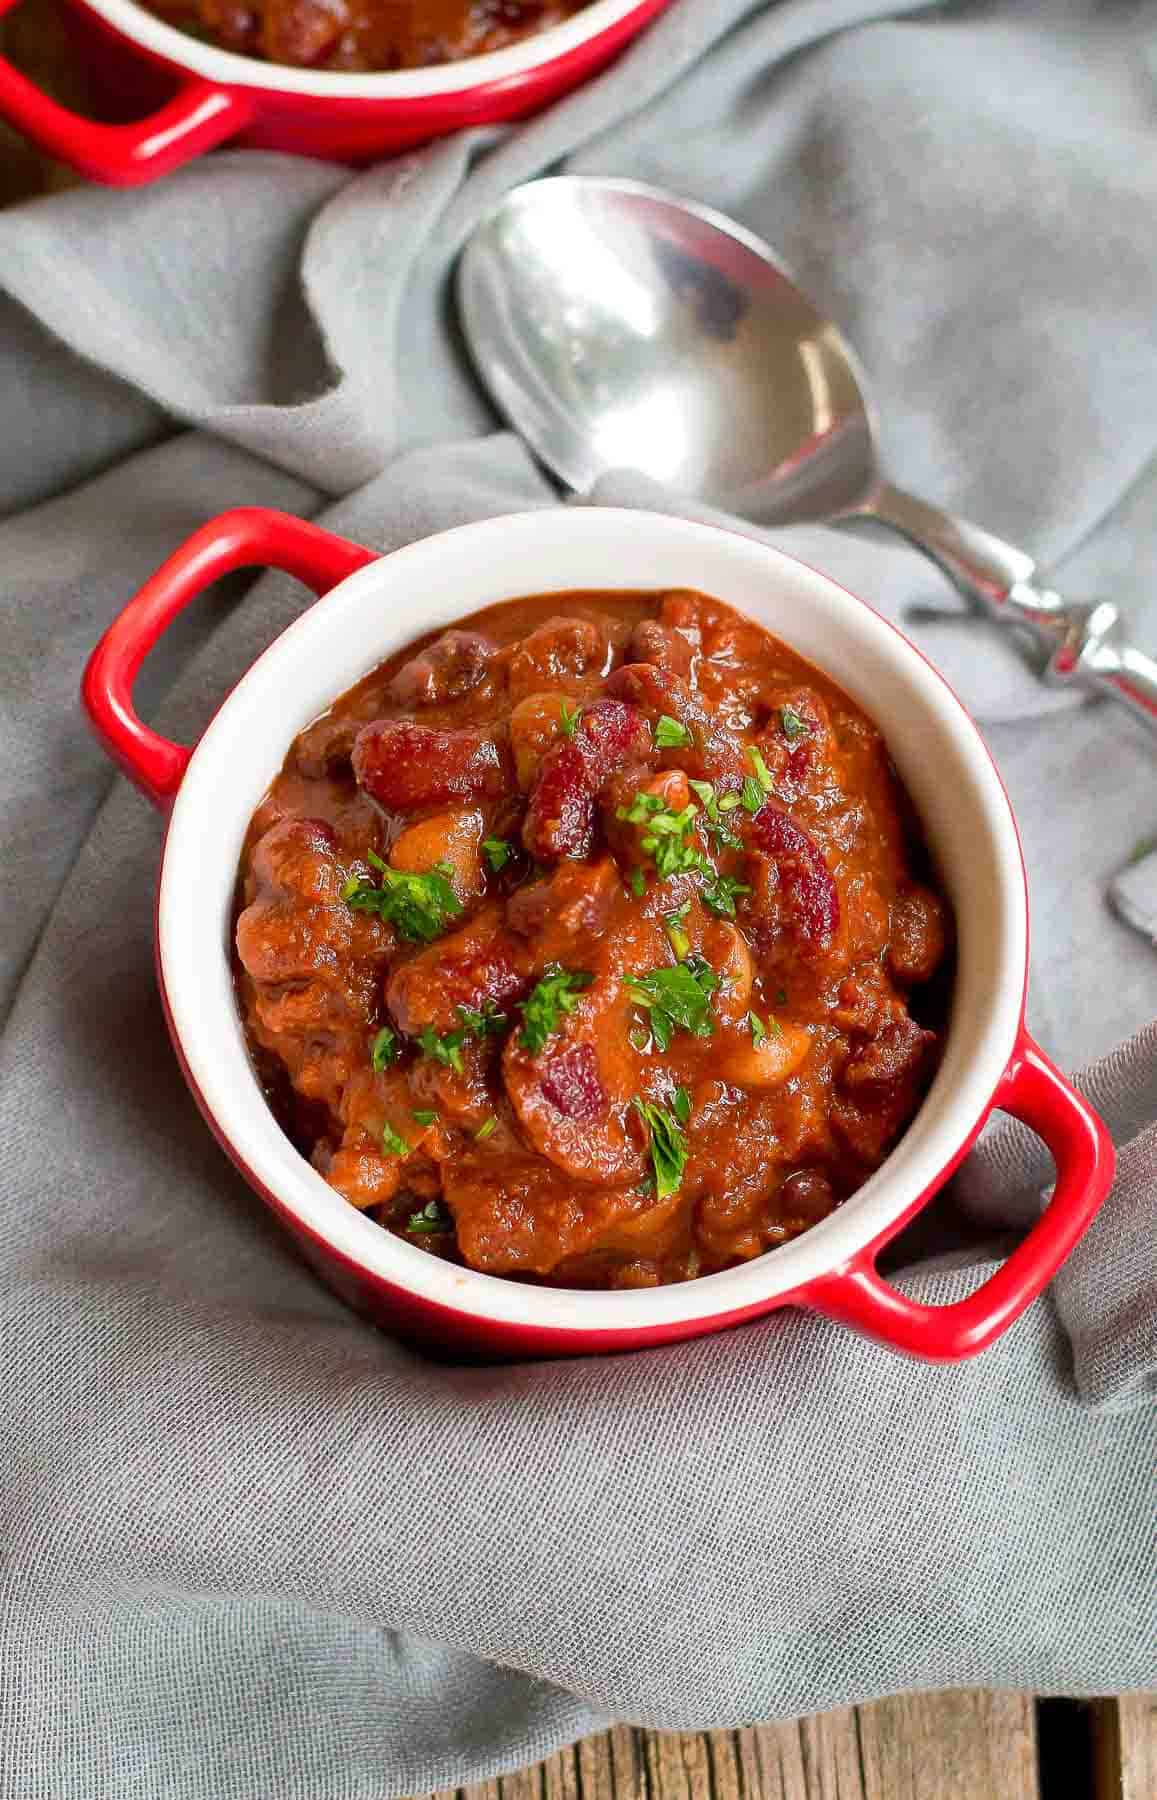 Meatless bean chili in a small red bowl, set on a gray napkin.